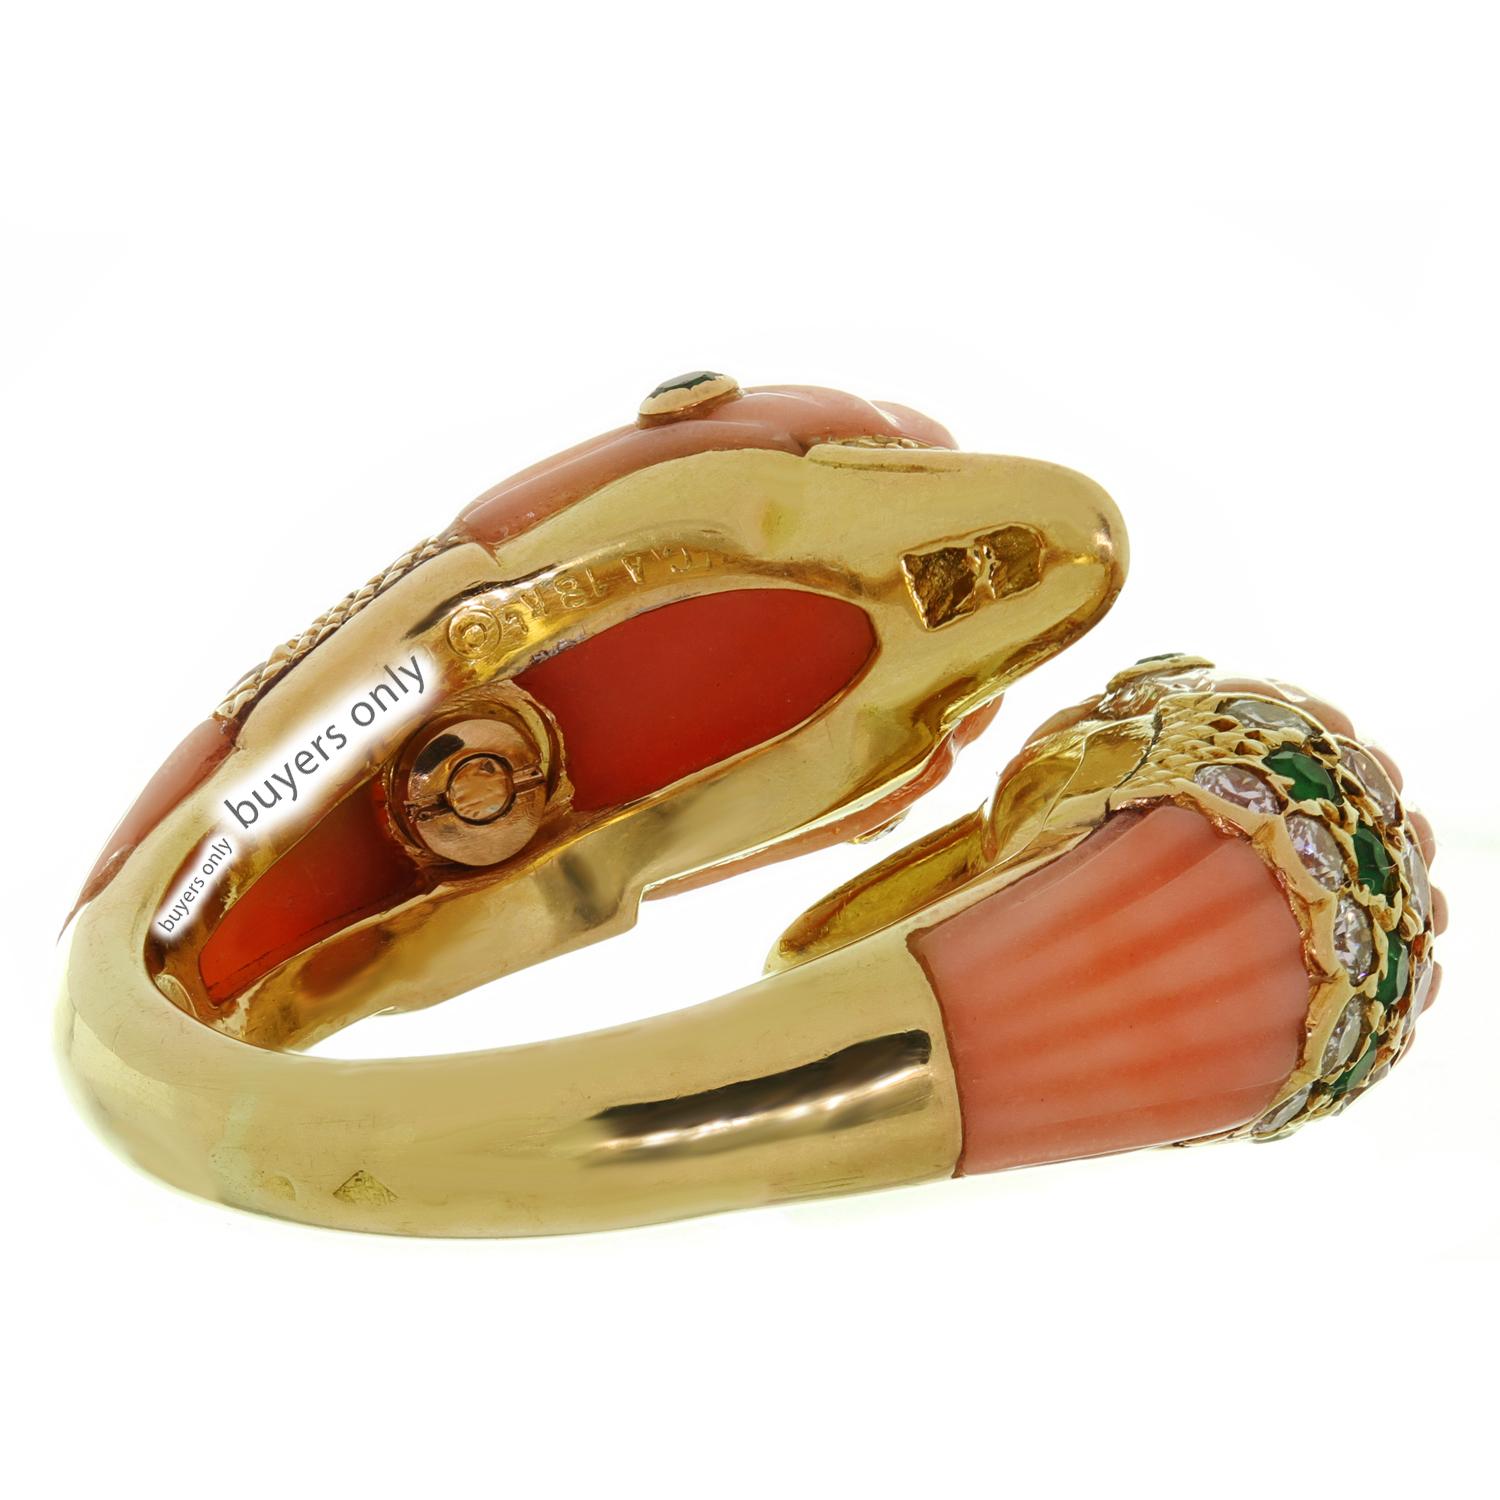 VAN CLEEF & ARPELS Pink Coral Emerald Diamond Bypass Dolphins Ring 54 2